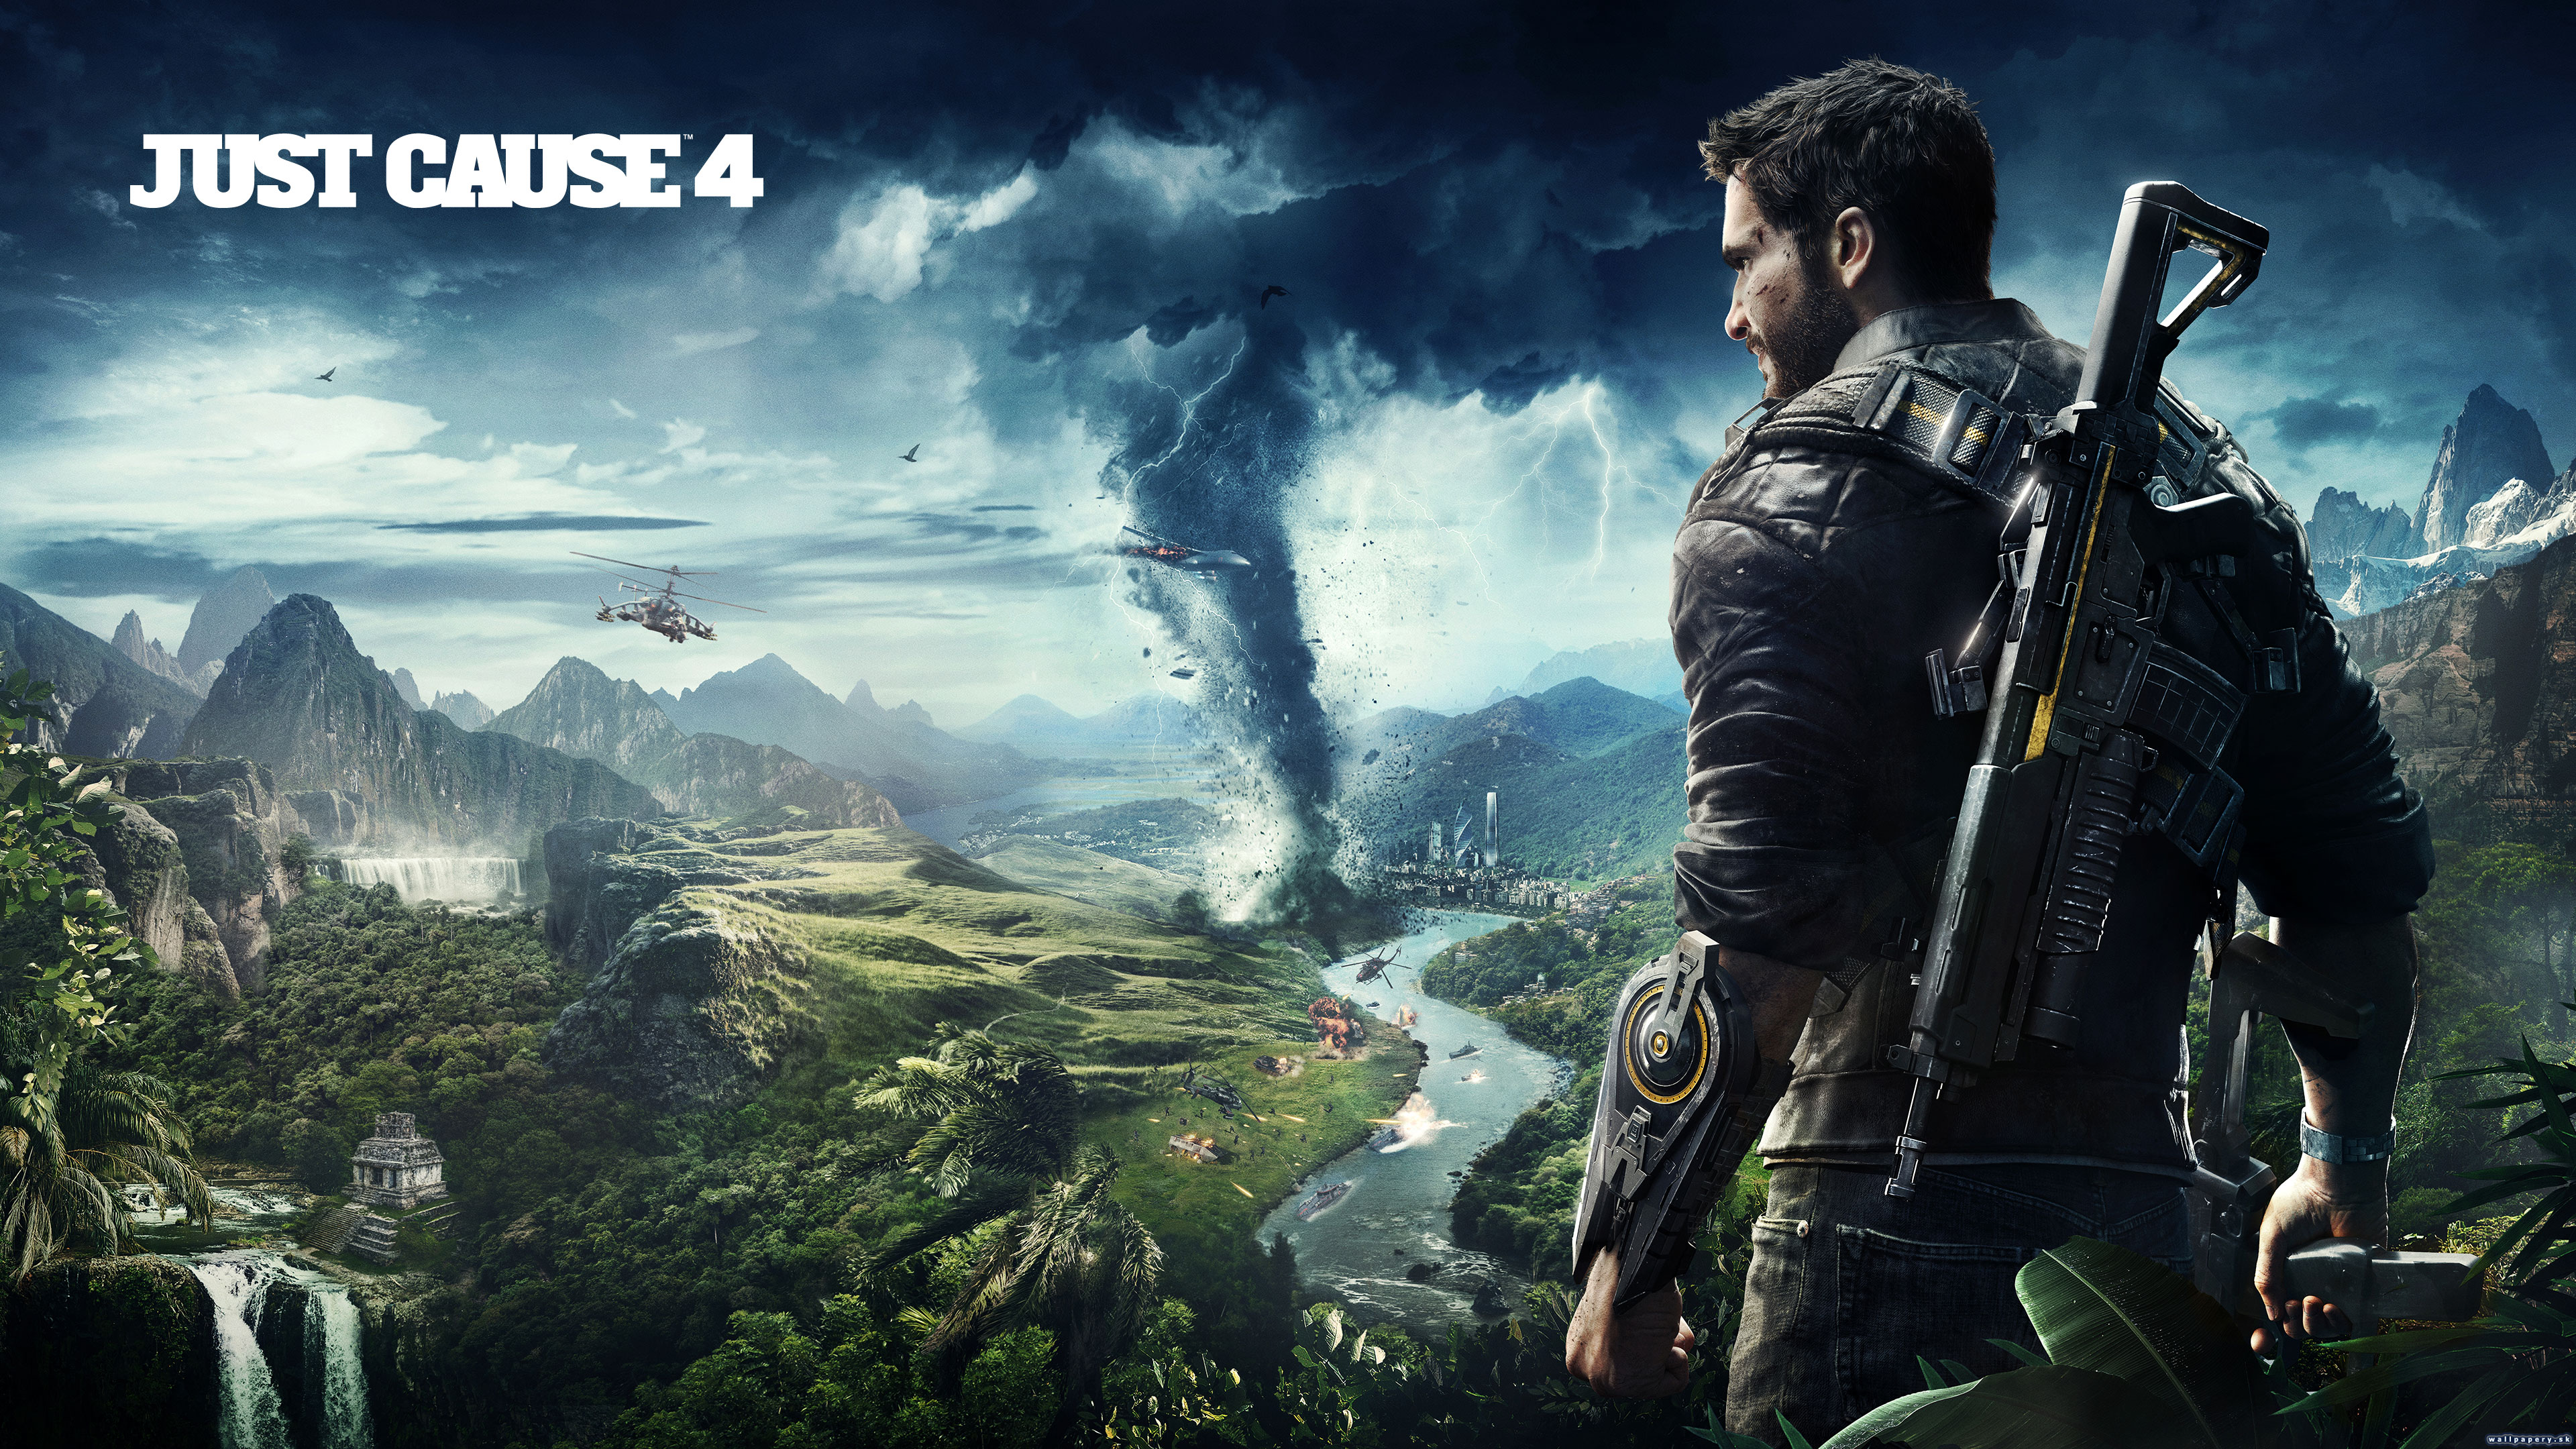 Just Cause 4 - wallpaper 1